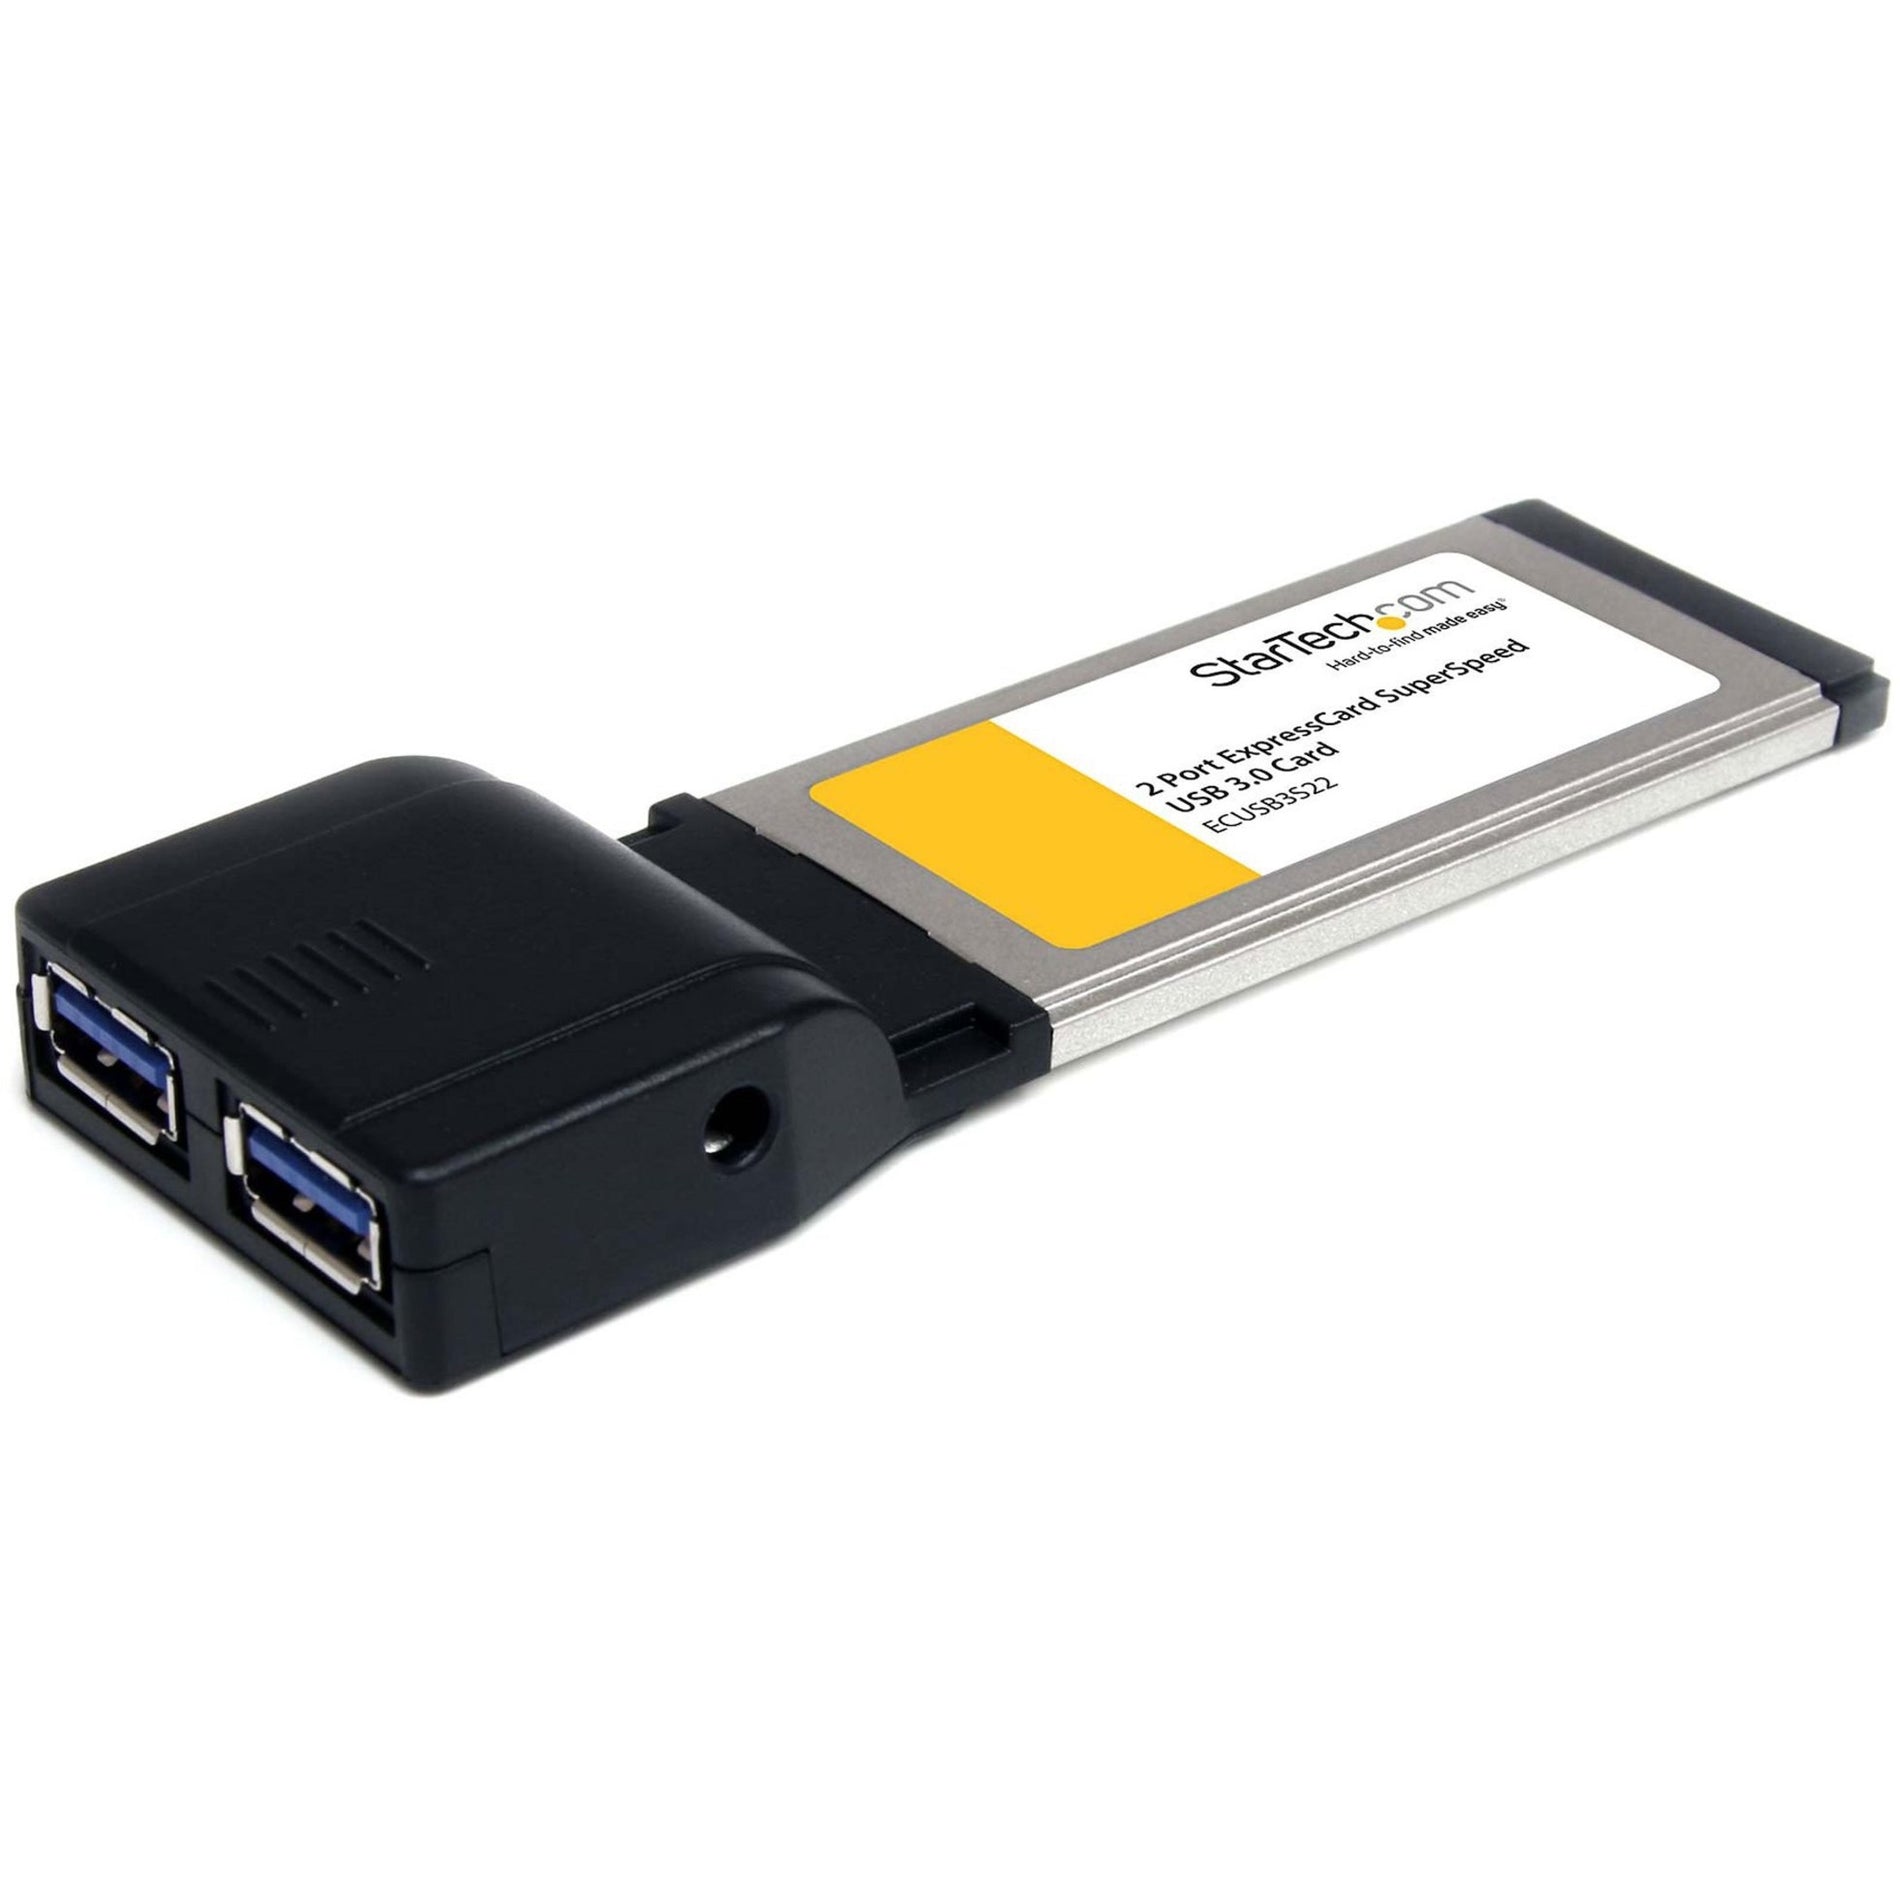 StarTech.com ECUSB3S22 2 Port ExpressCard SuperSpeed USB 3.0 Card Adapter, Easy Plug-and-Play USB Expansion